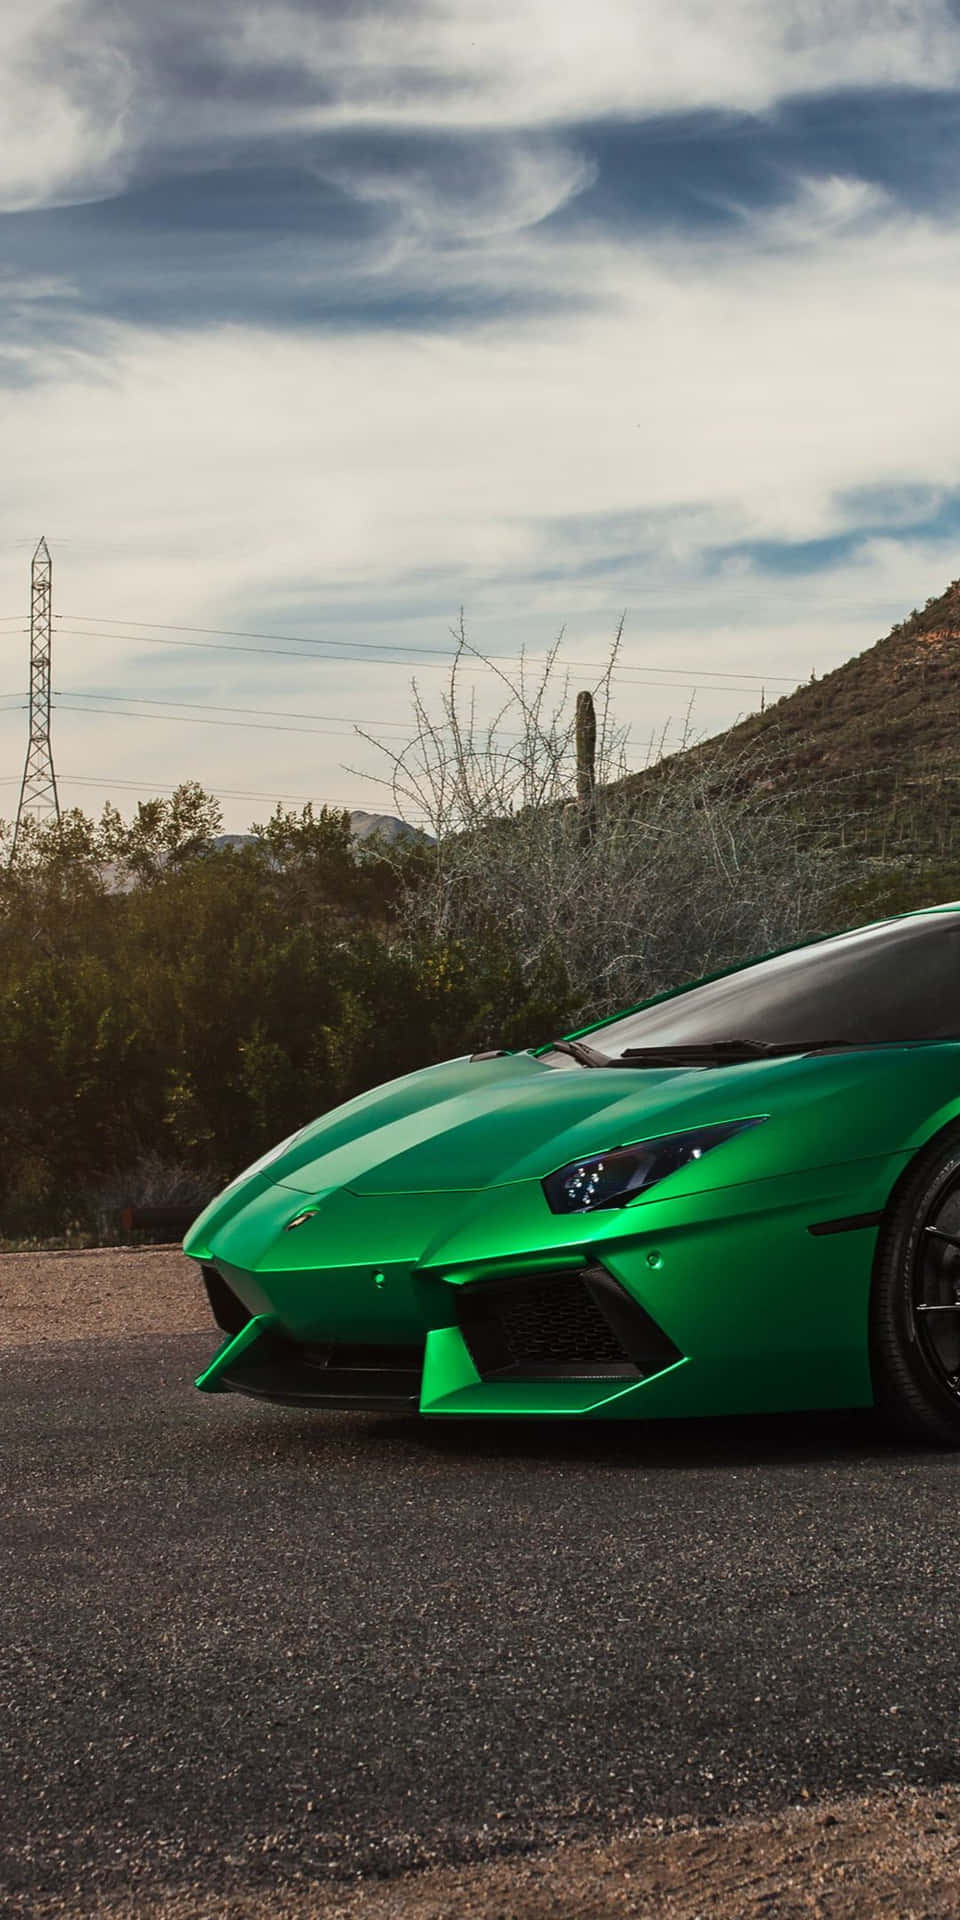 a green lamborghini parked on the side of the road